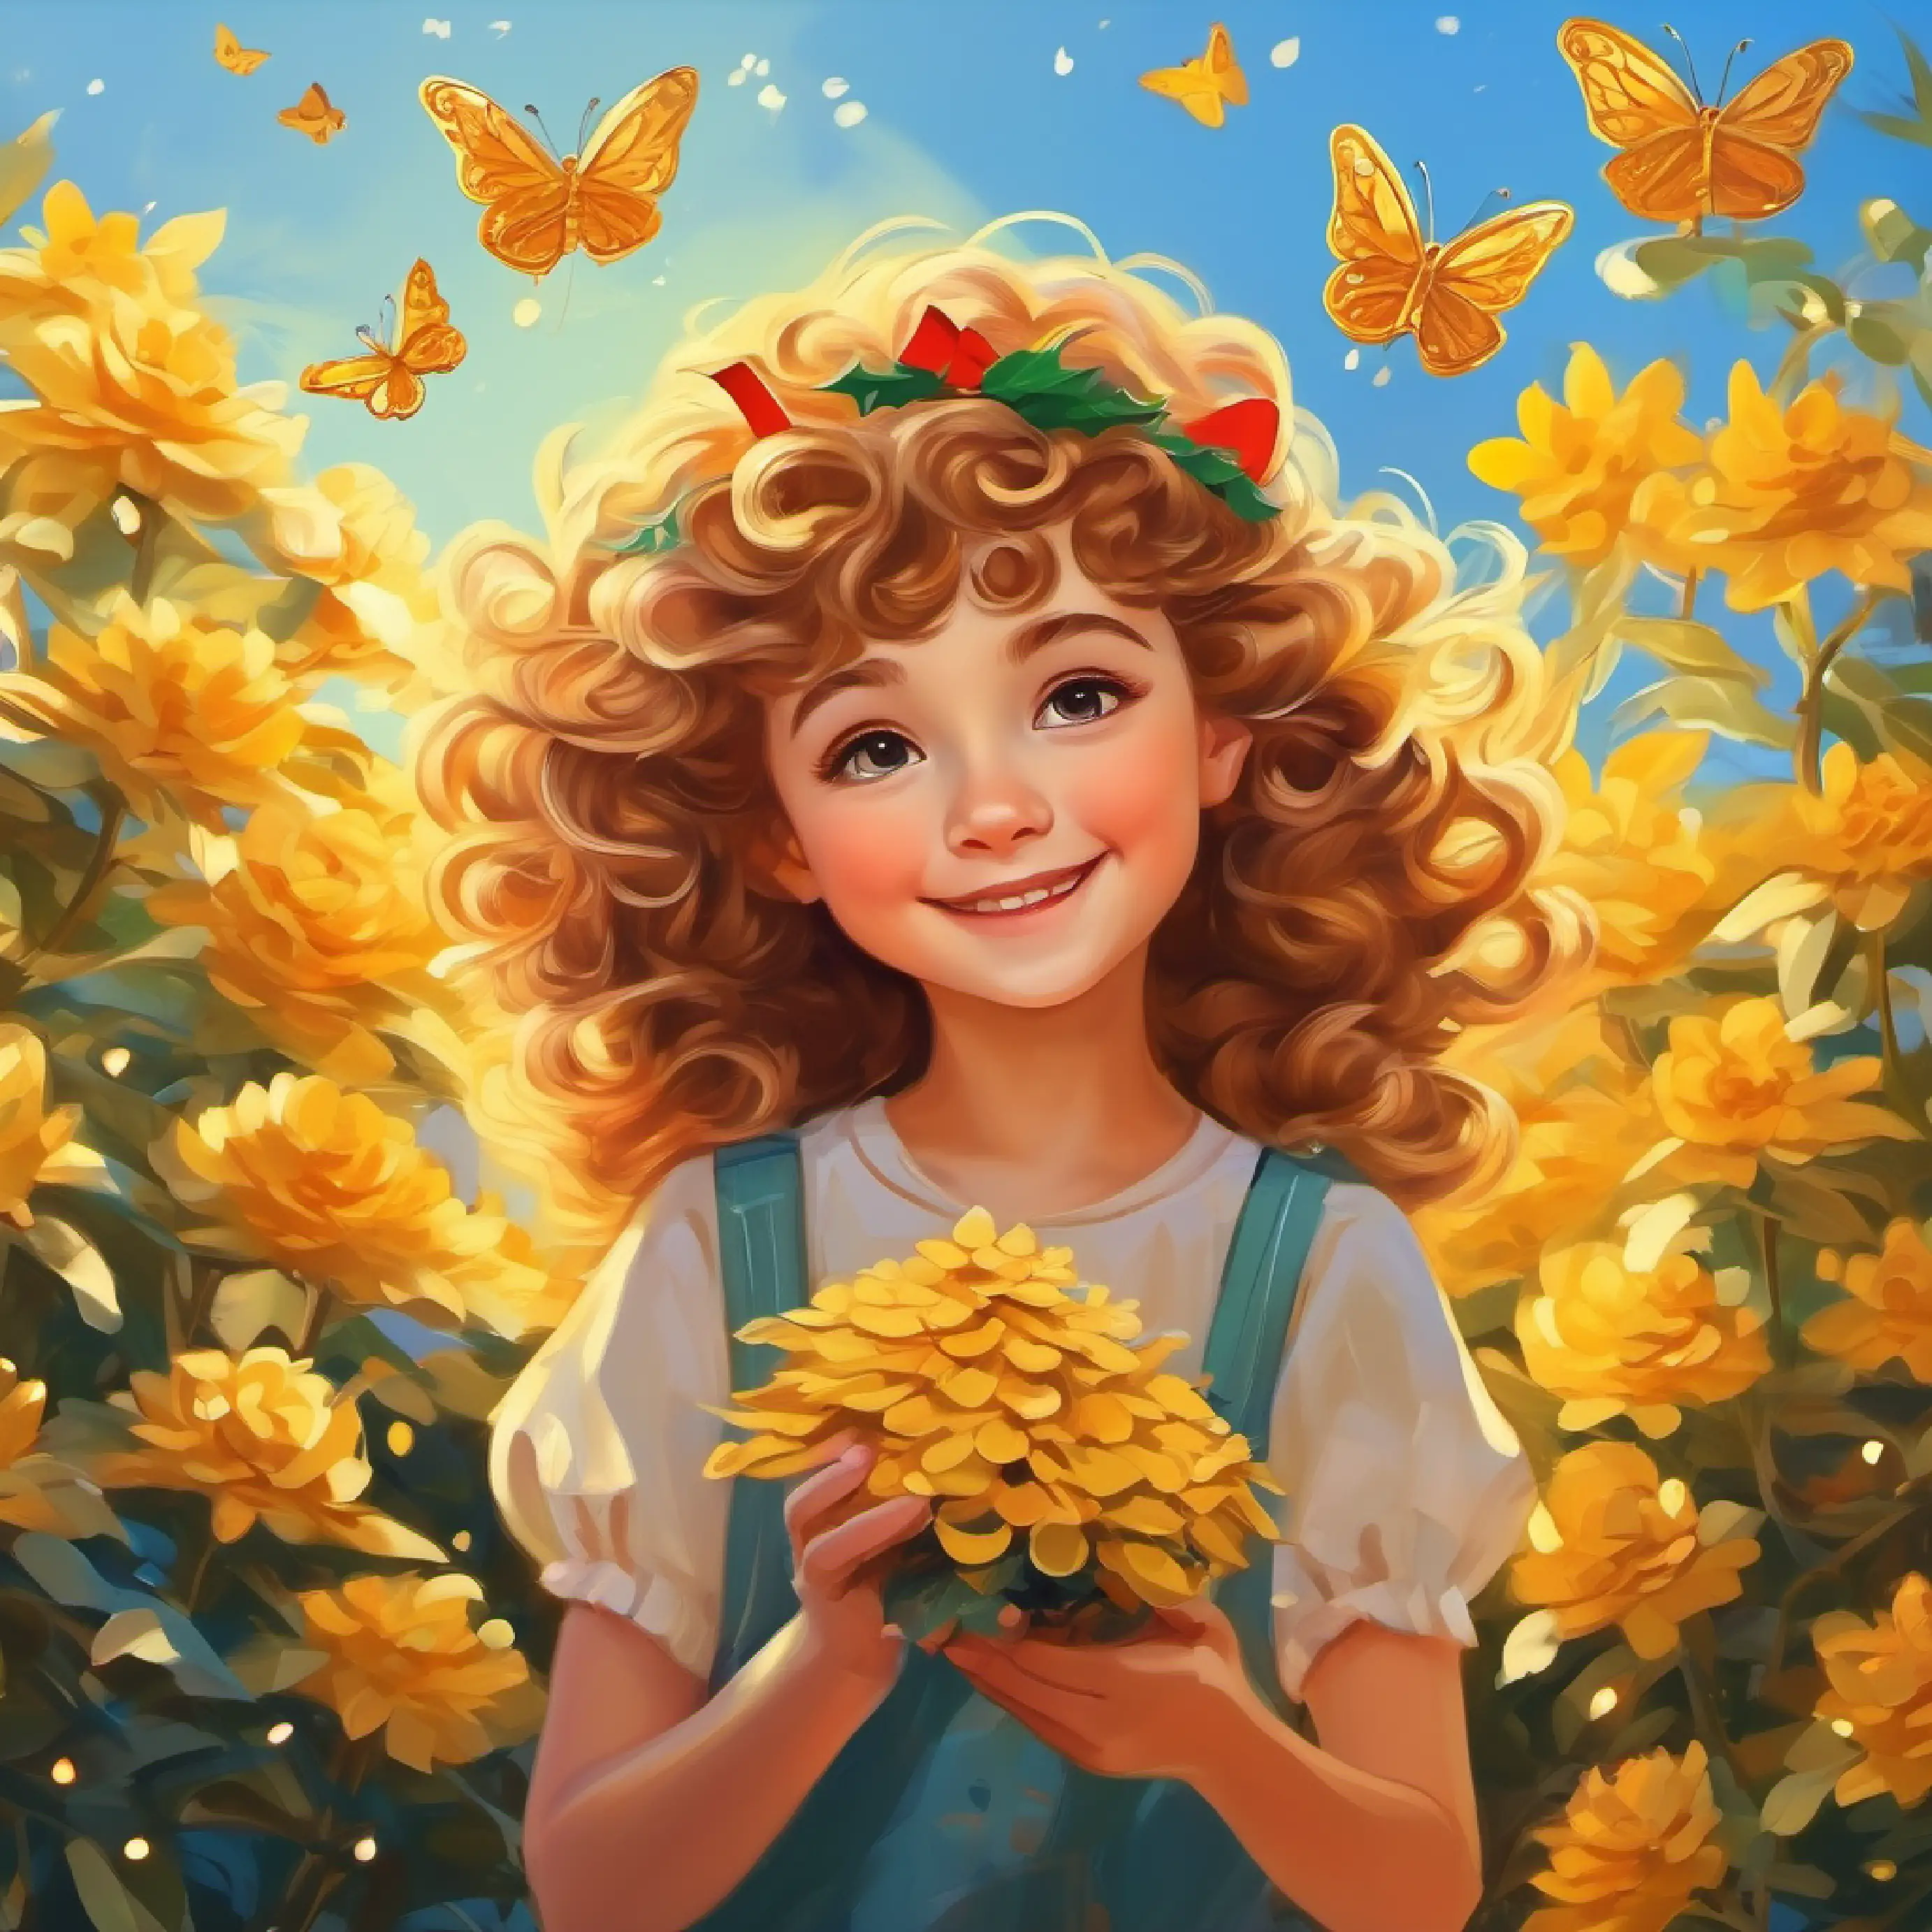 Golden curls, joyful, loves outdoors, kind heart's appearance, playing with butterflies in the sun.